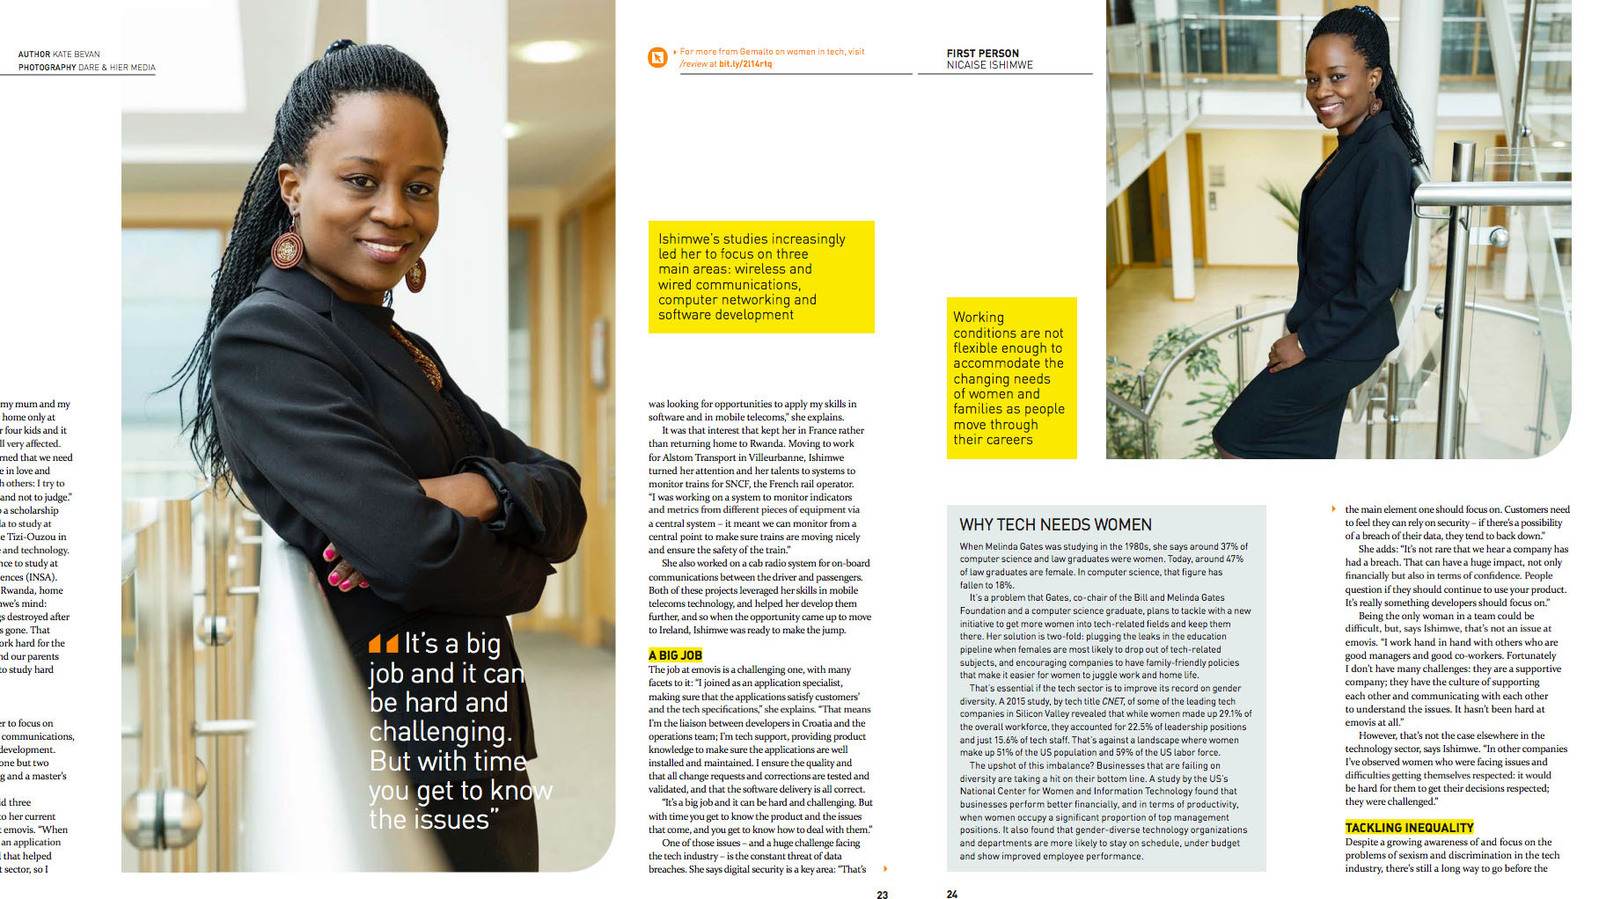 Magazine article profile photography: Portraits of woman in tech industry